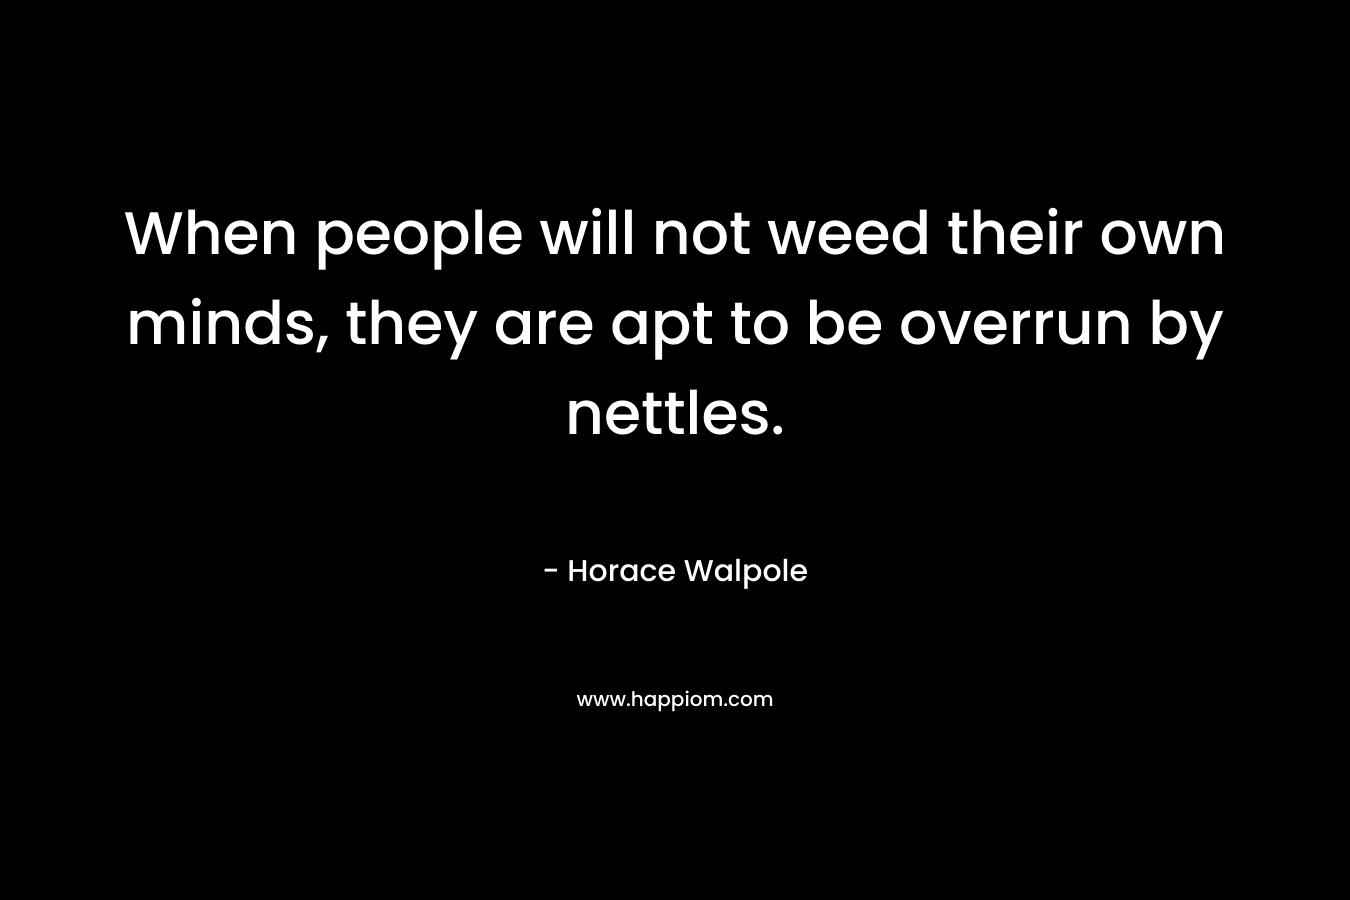 When people will not weed their own minds, they are apt to be overrun by nettles. – Horace Walpole